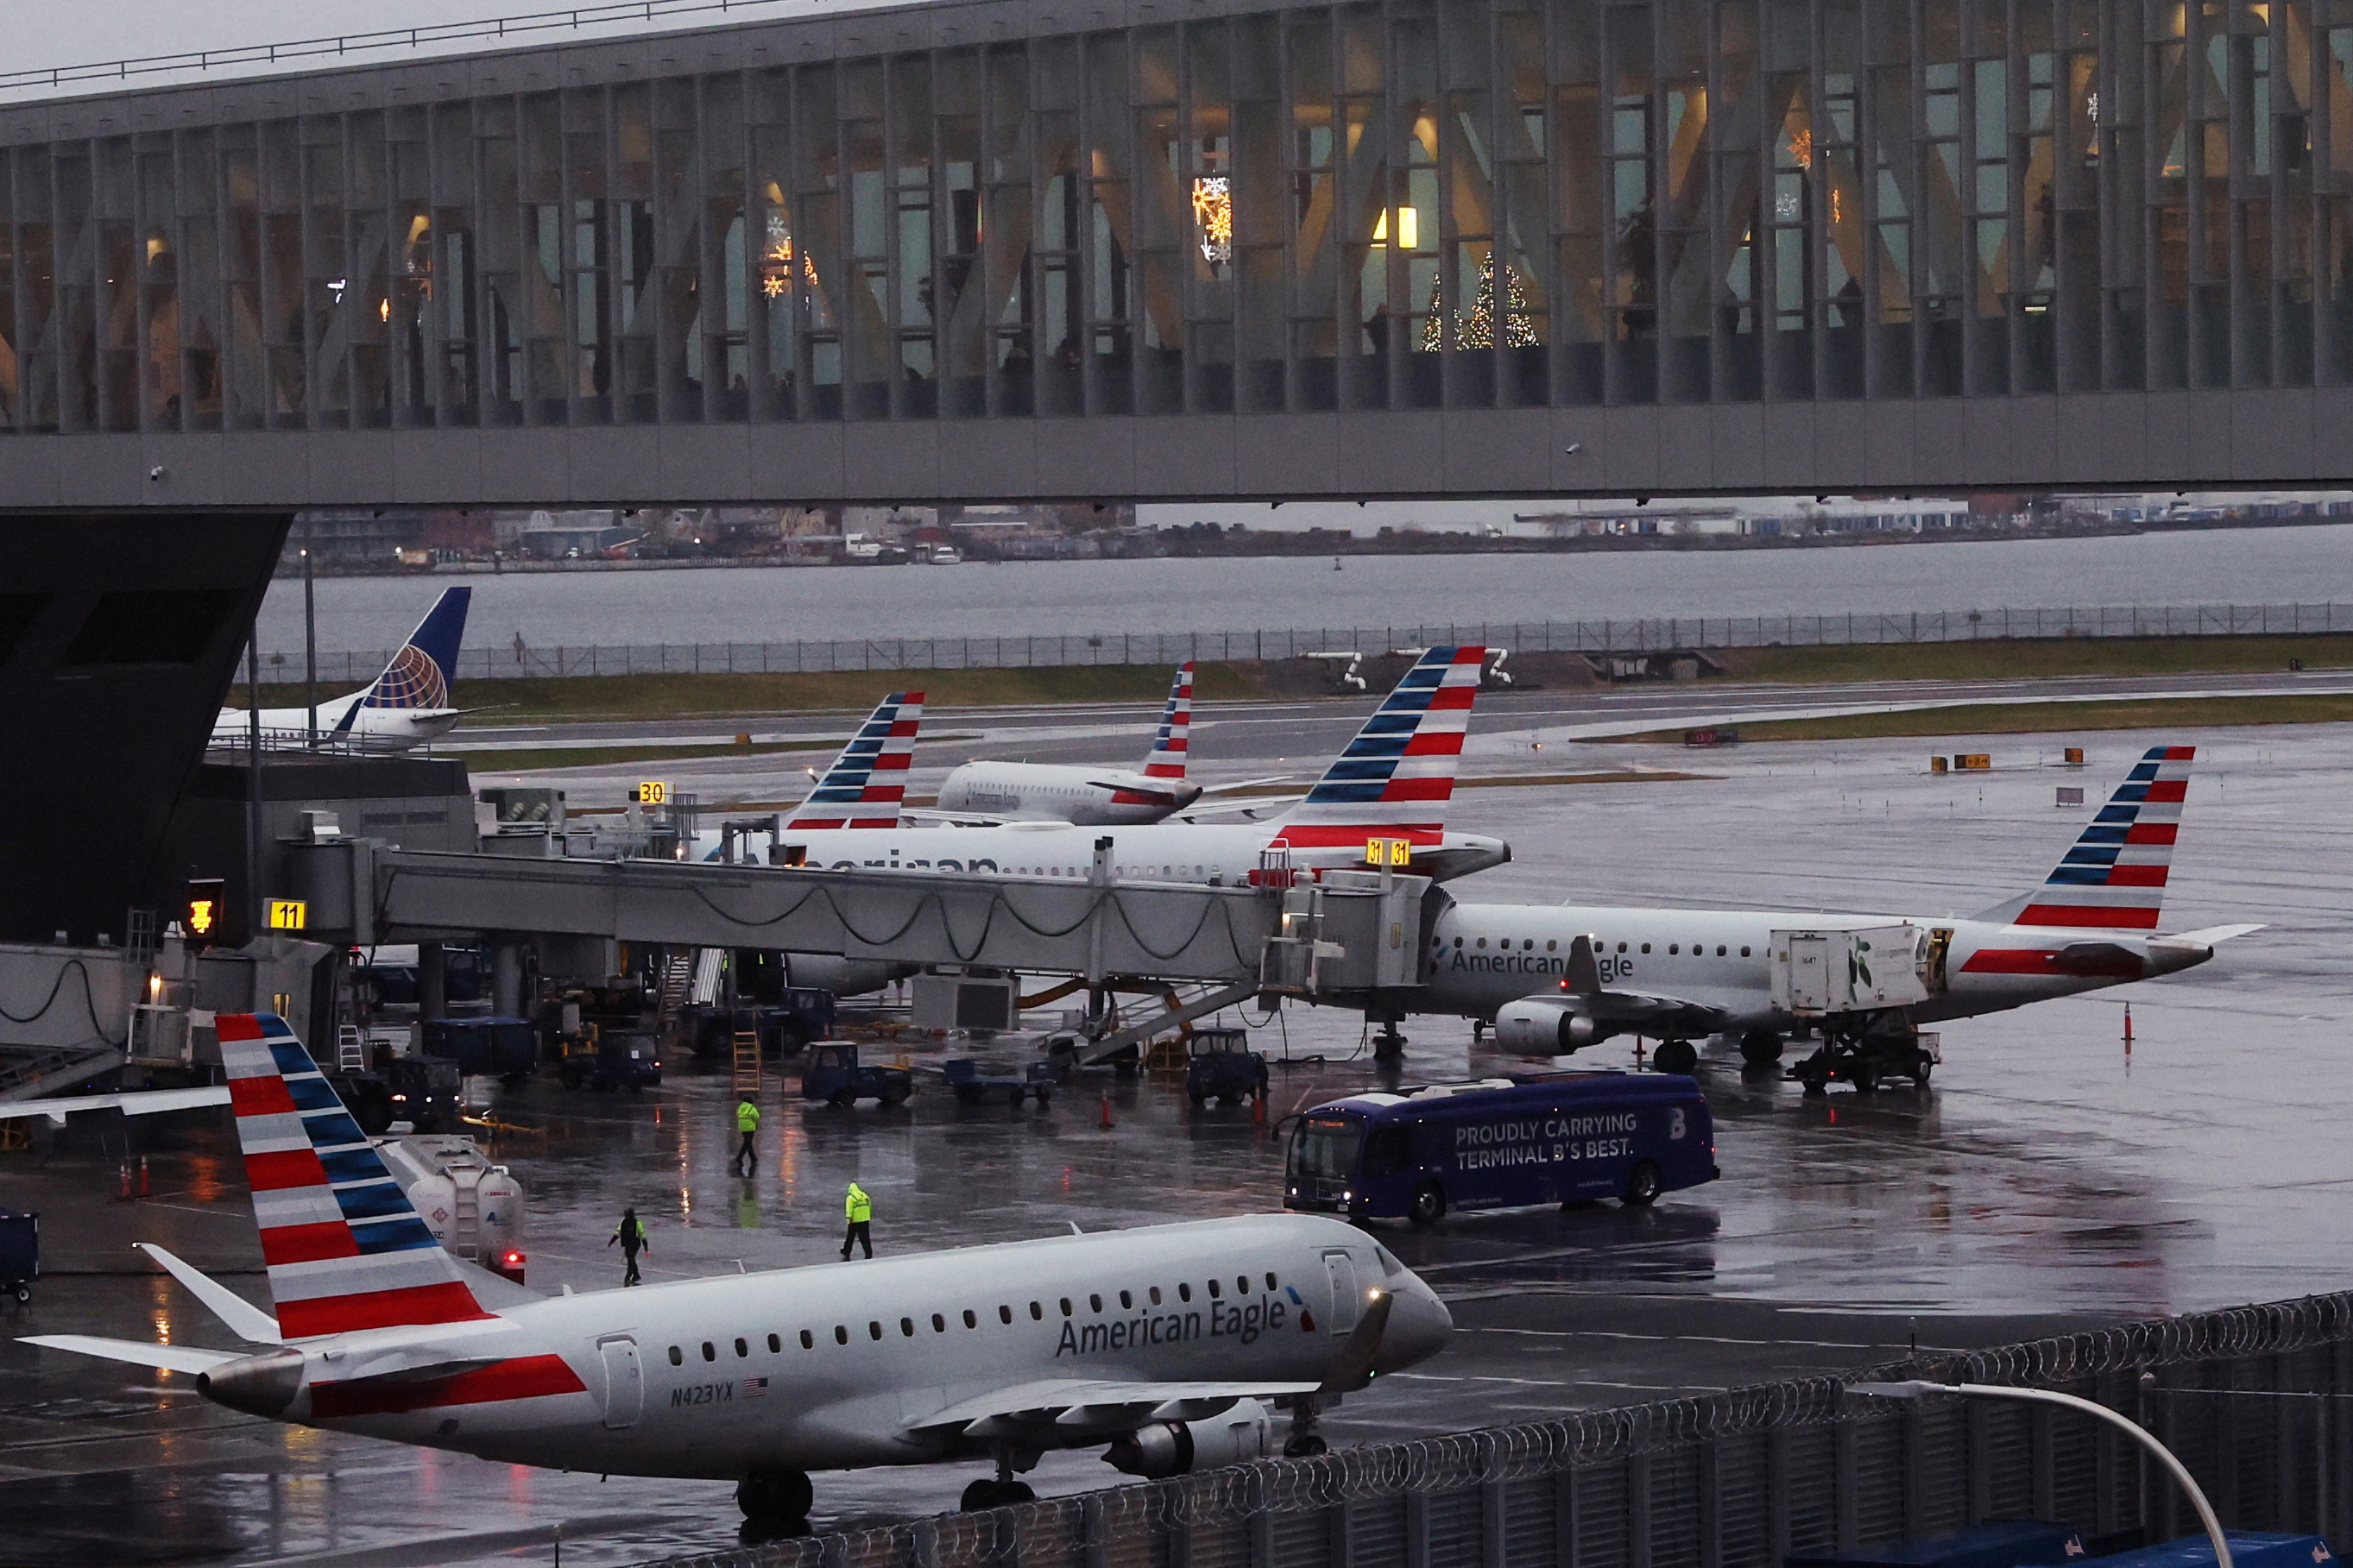 American Airlines planes are seen at gates at LaGuardia Airport ahead of the Thanksgiving holiday, in New York City